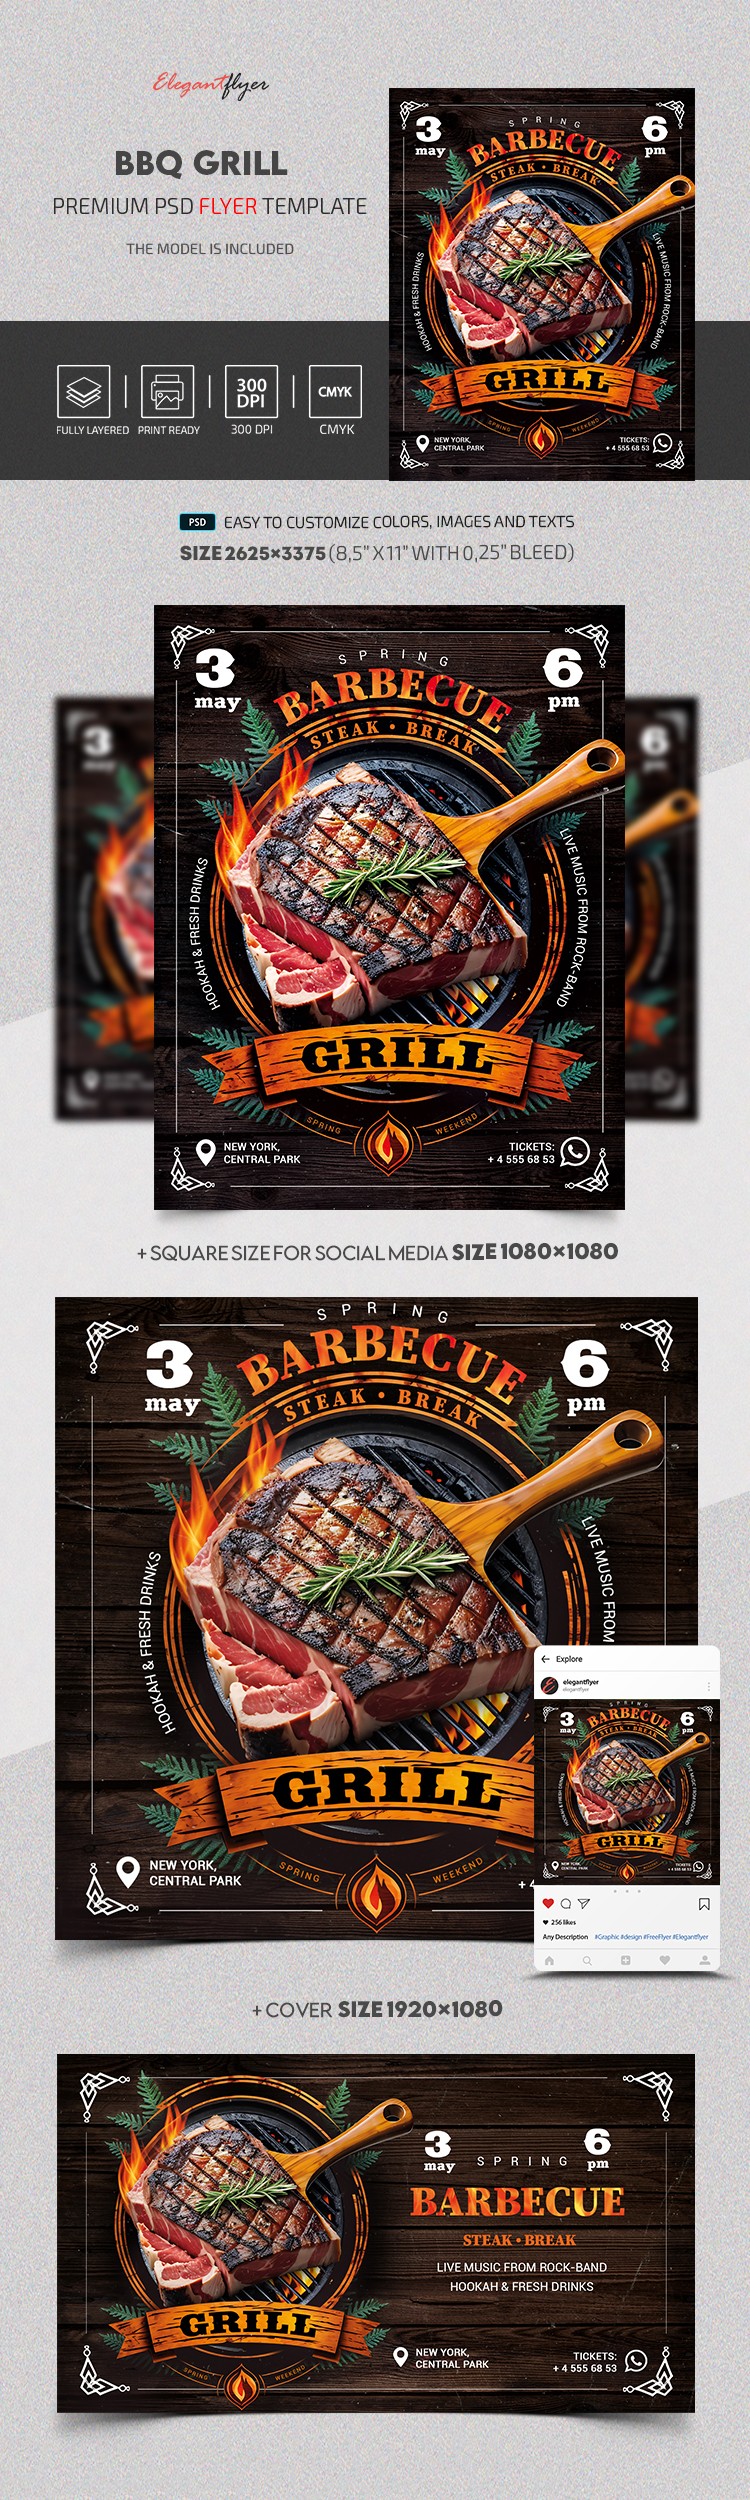 Barbecue Grill by ElegantFlyer